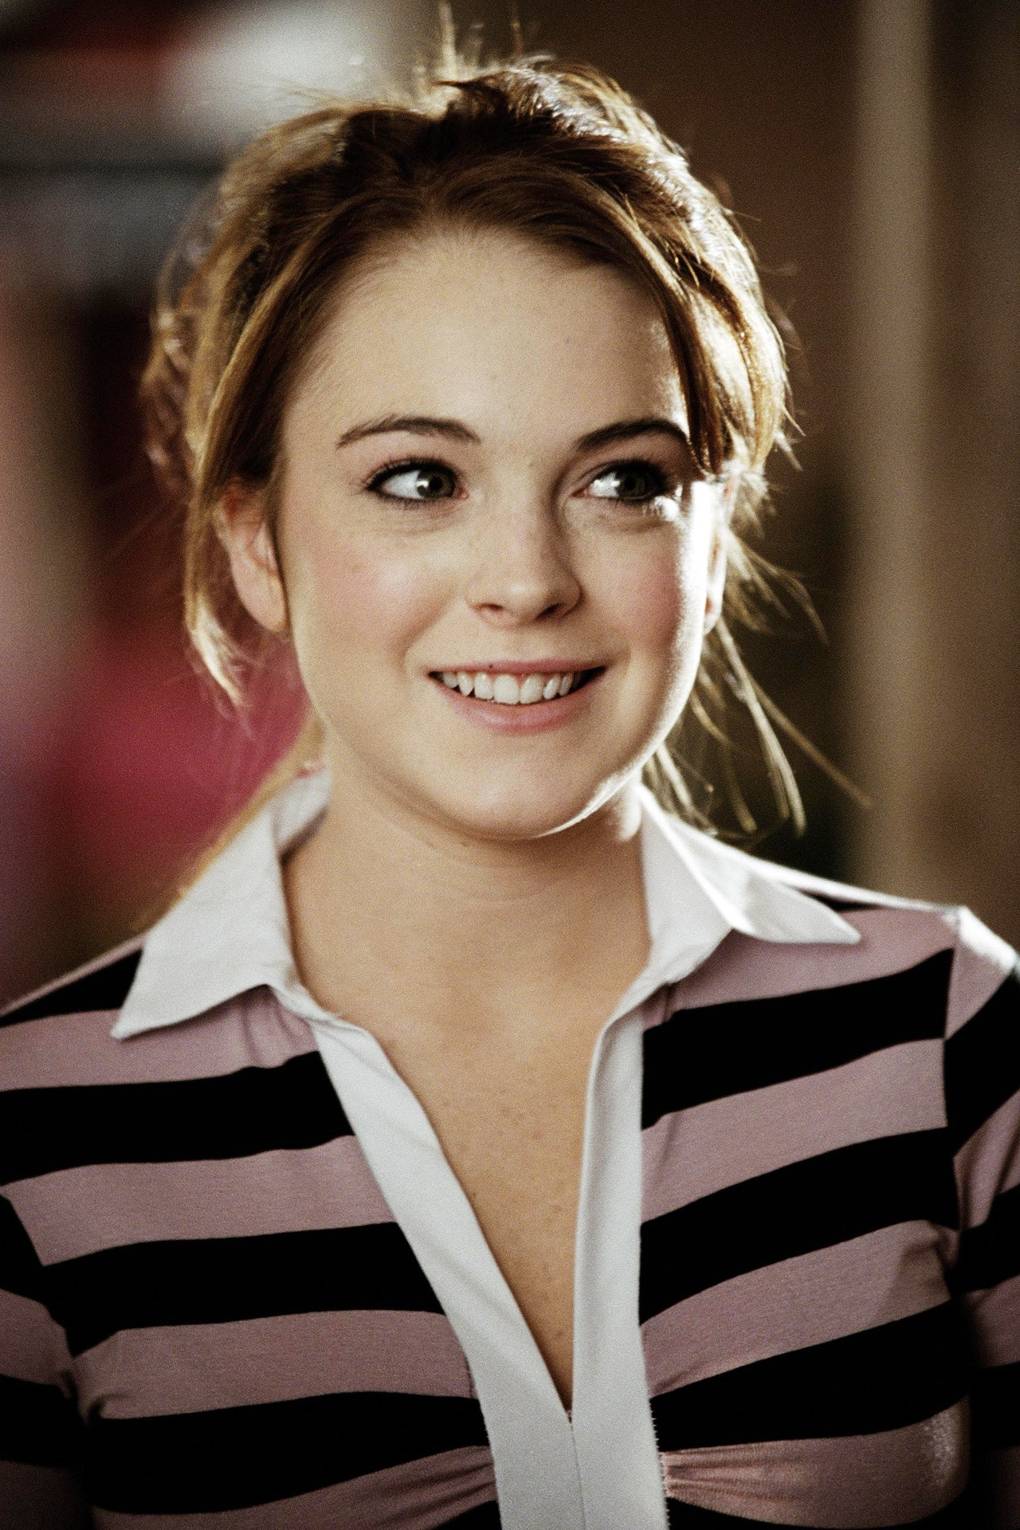 Best Mean Girls Quote Lindsay Lohan And Regina George Glamour Uk 7824